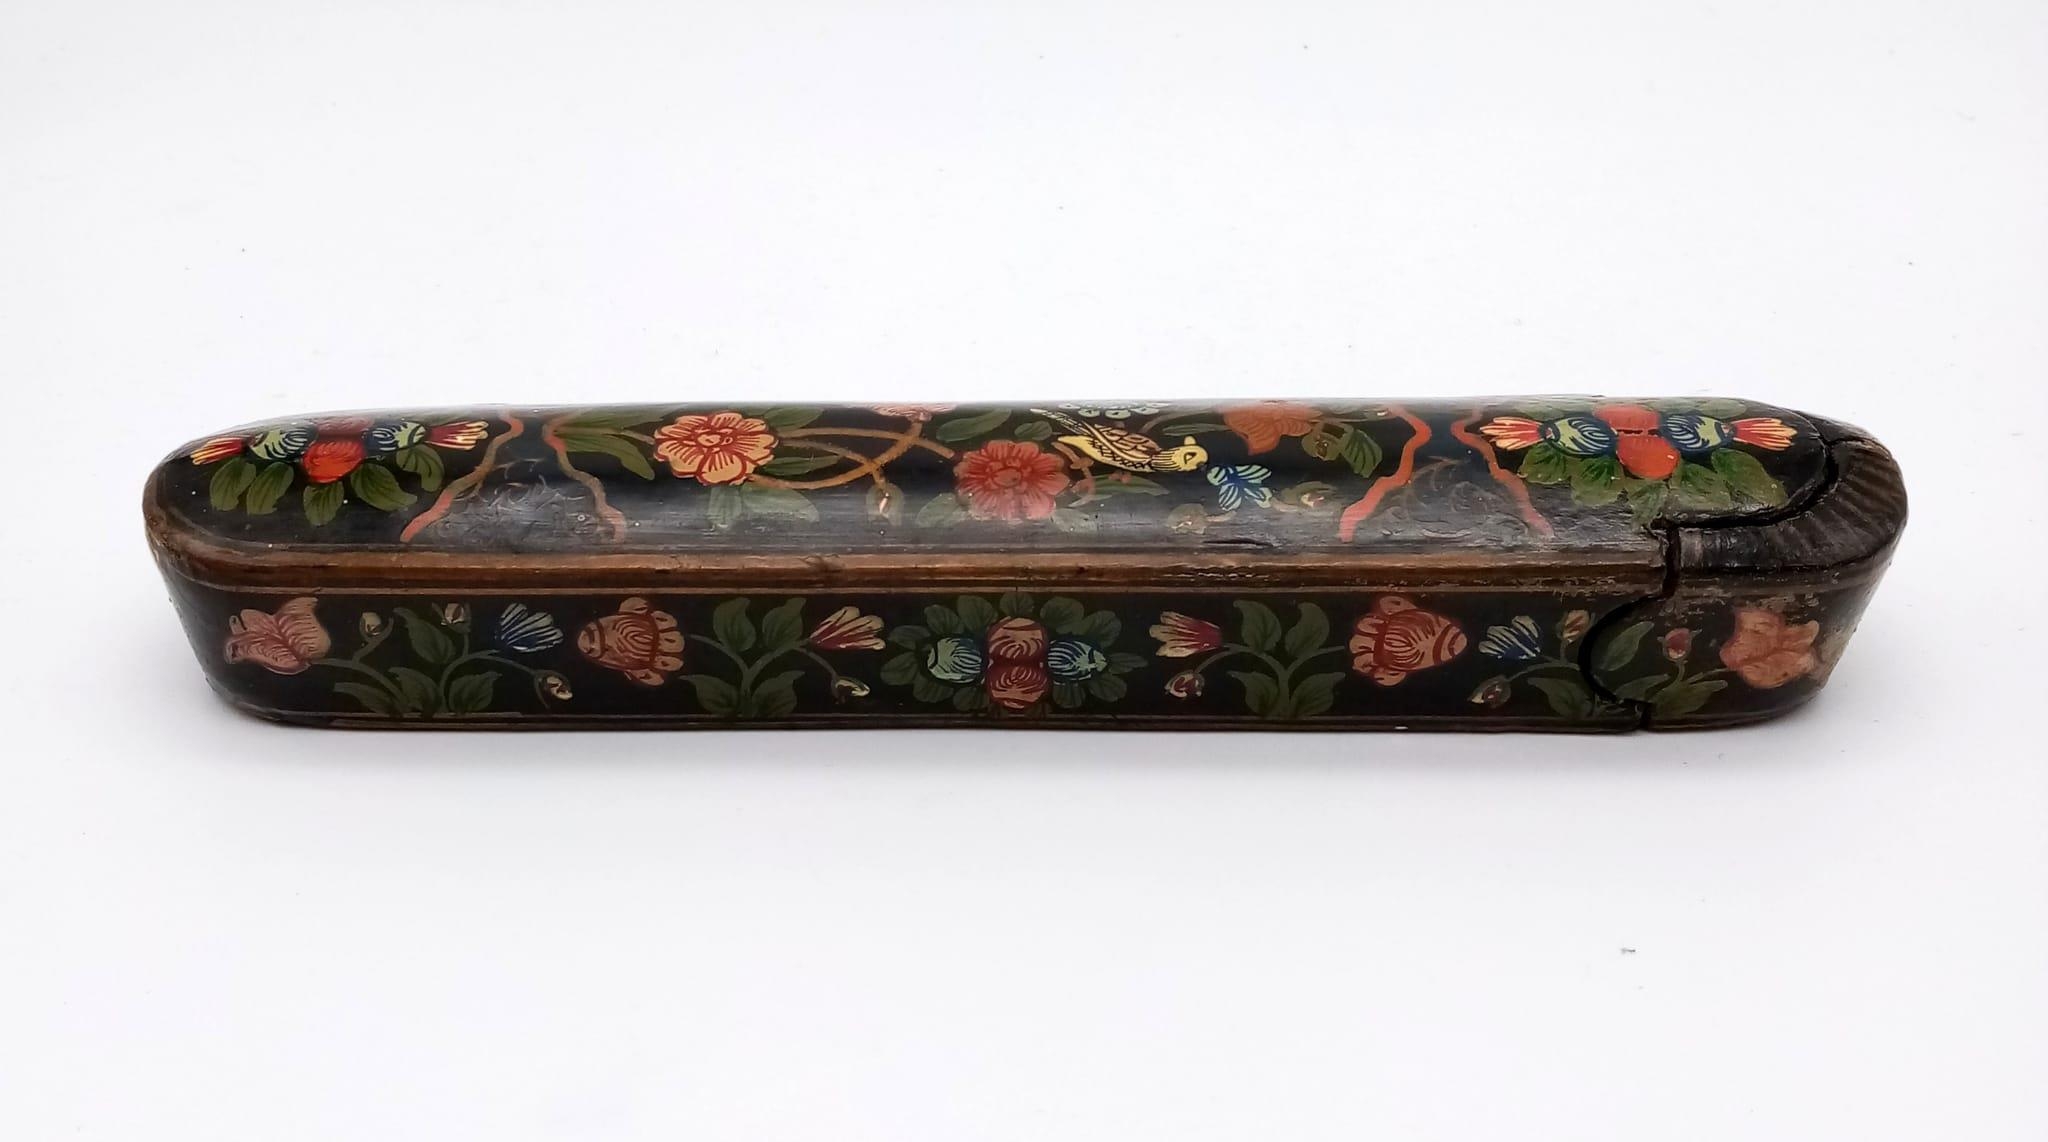 An early Persian Islamic Ghajavi pen box, known as Gol o Bol Boll. Hand painted with flowers and - Image 5 of 7